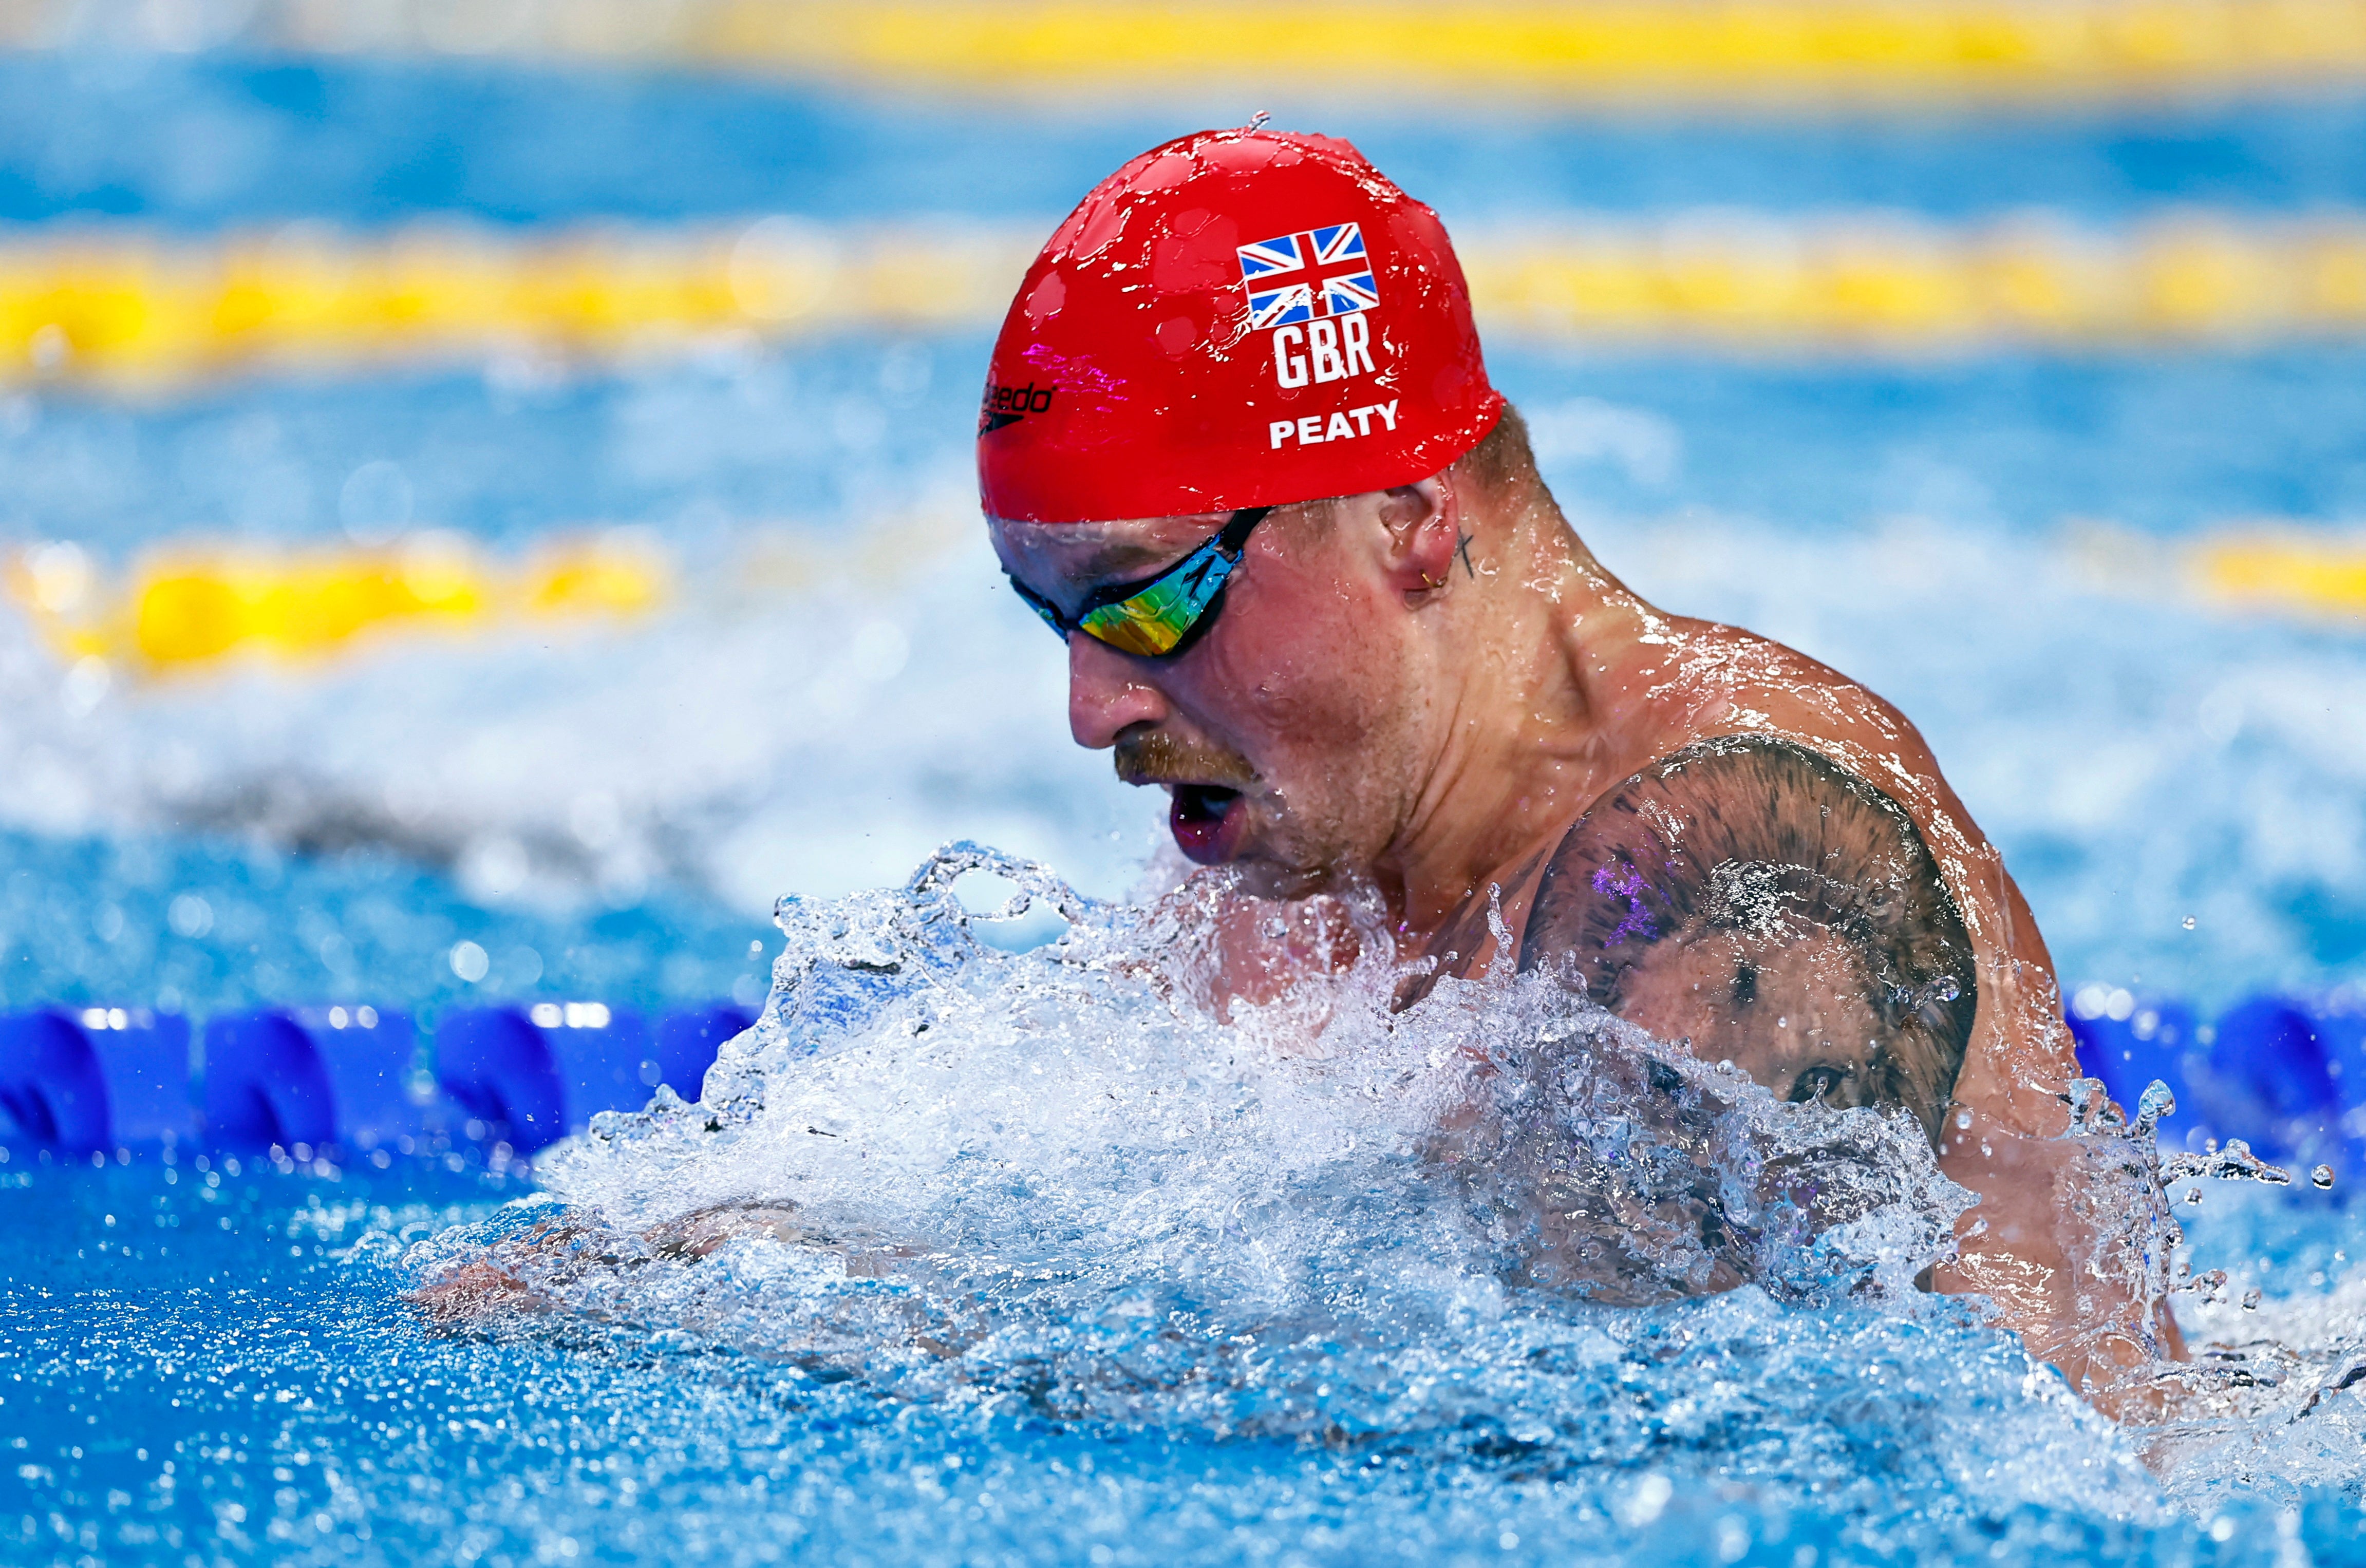 Peaty qualified in fourth place for the 50m breastroke final